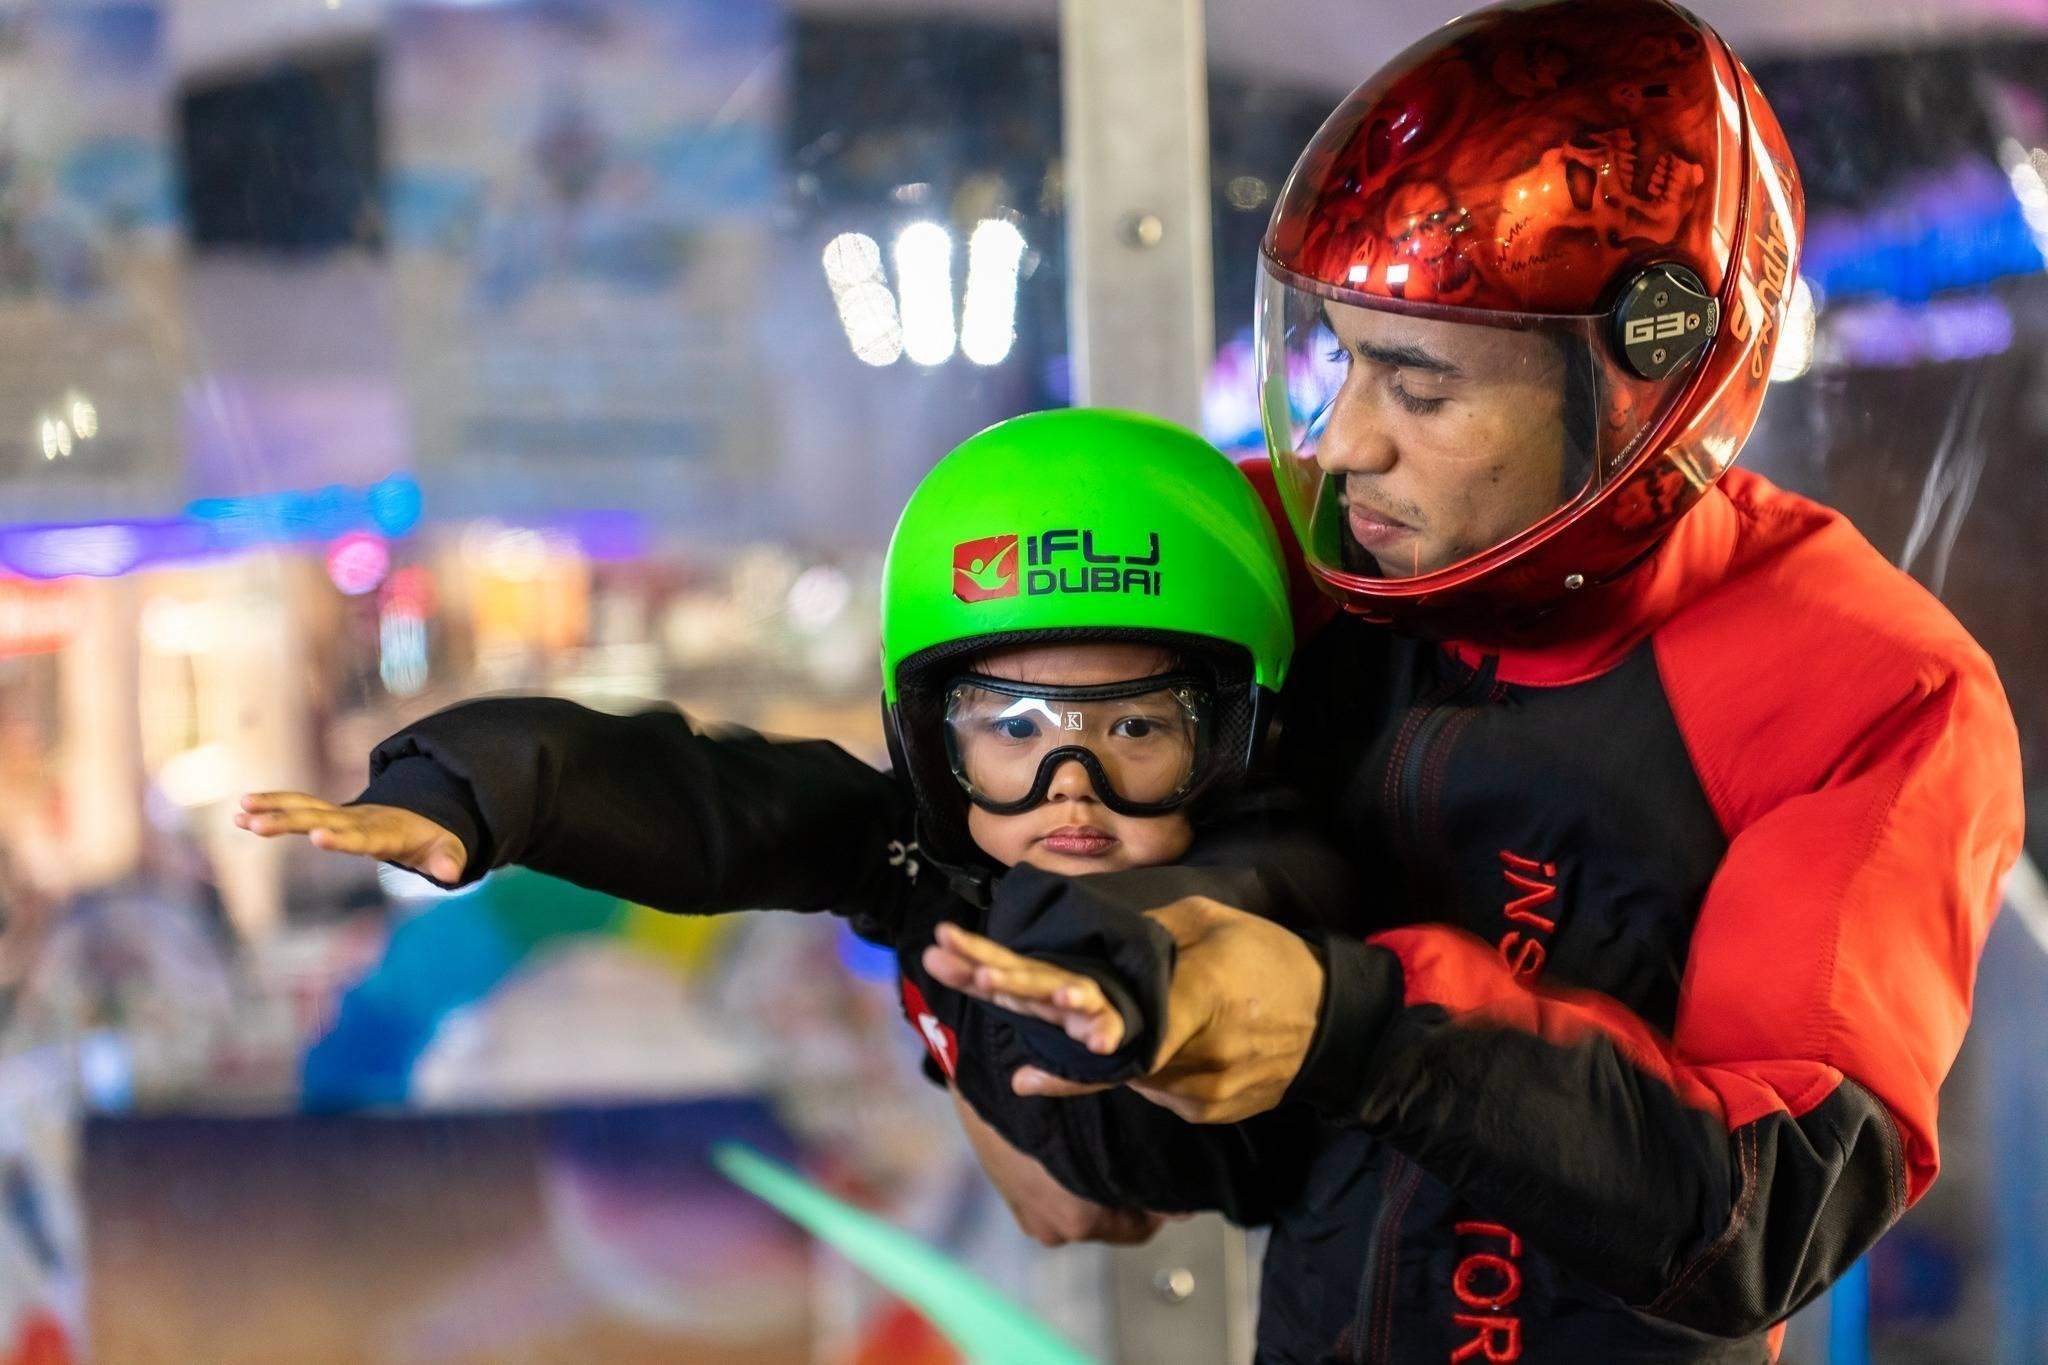 Indoor Skydiving at iFly Dubai1501